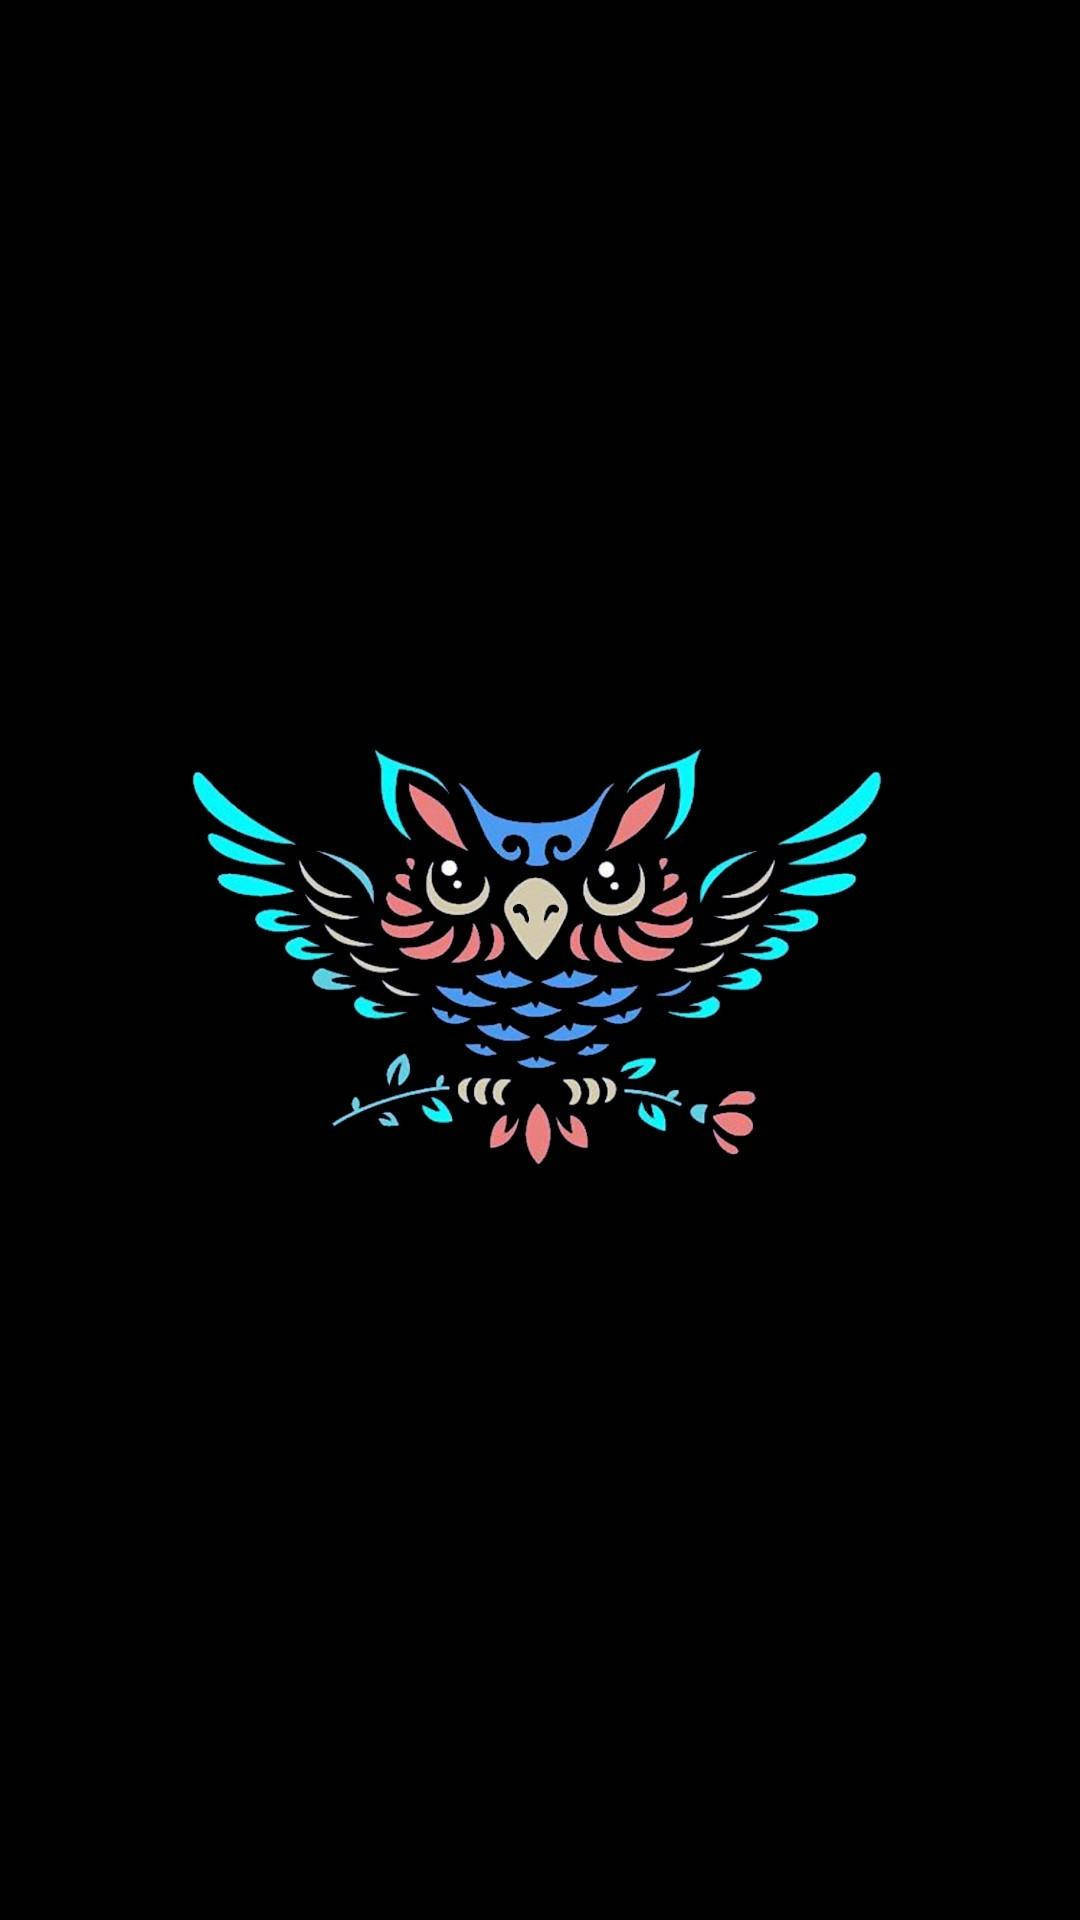 A Colorful Owl Logo On A Black Background Wallpaper